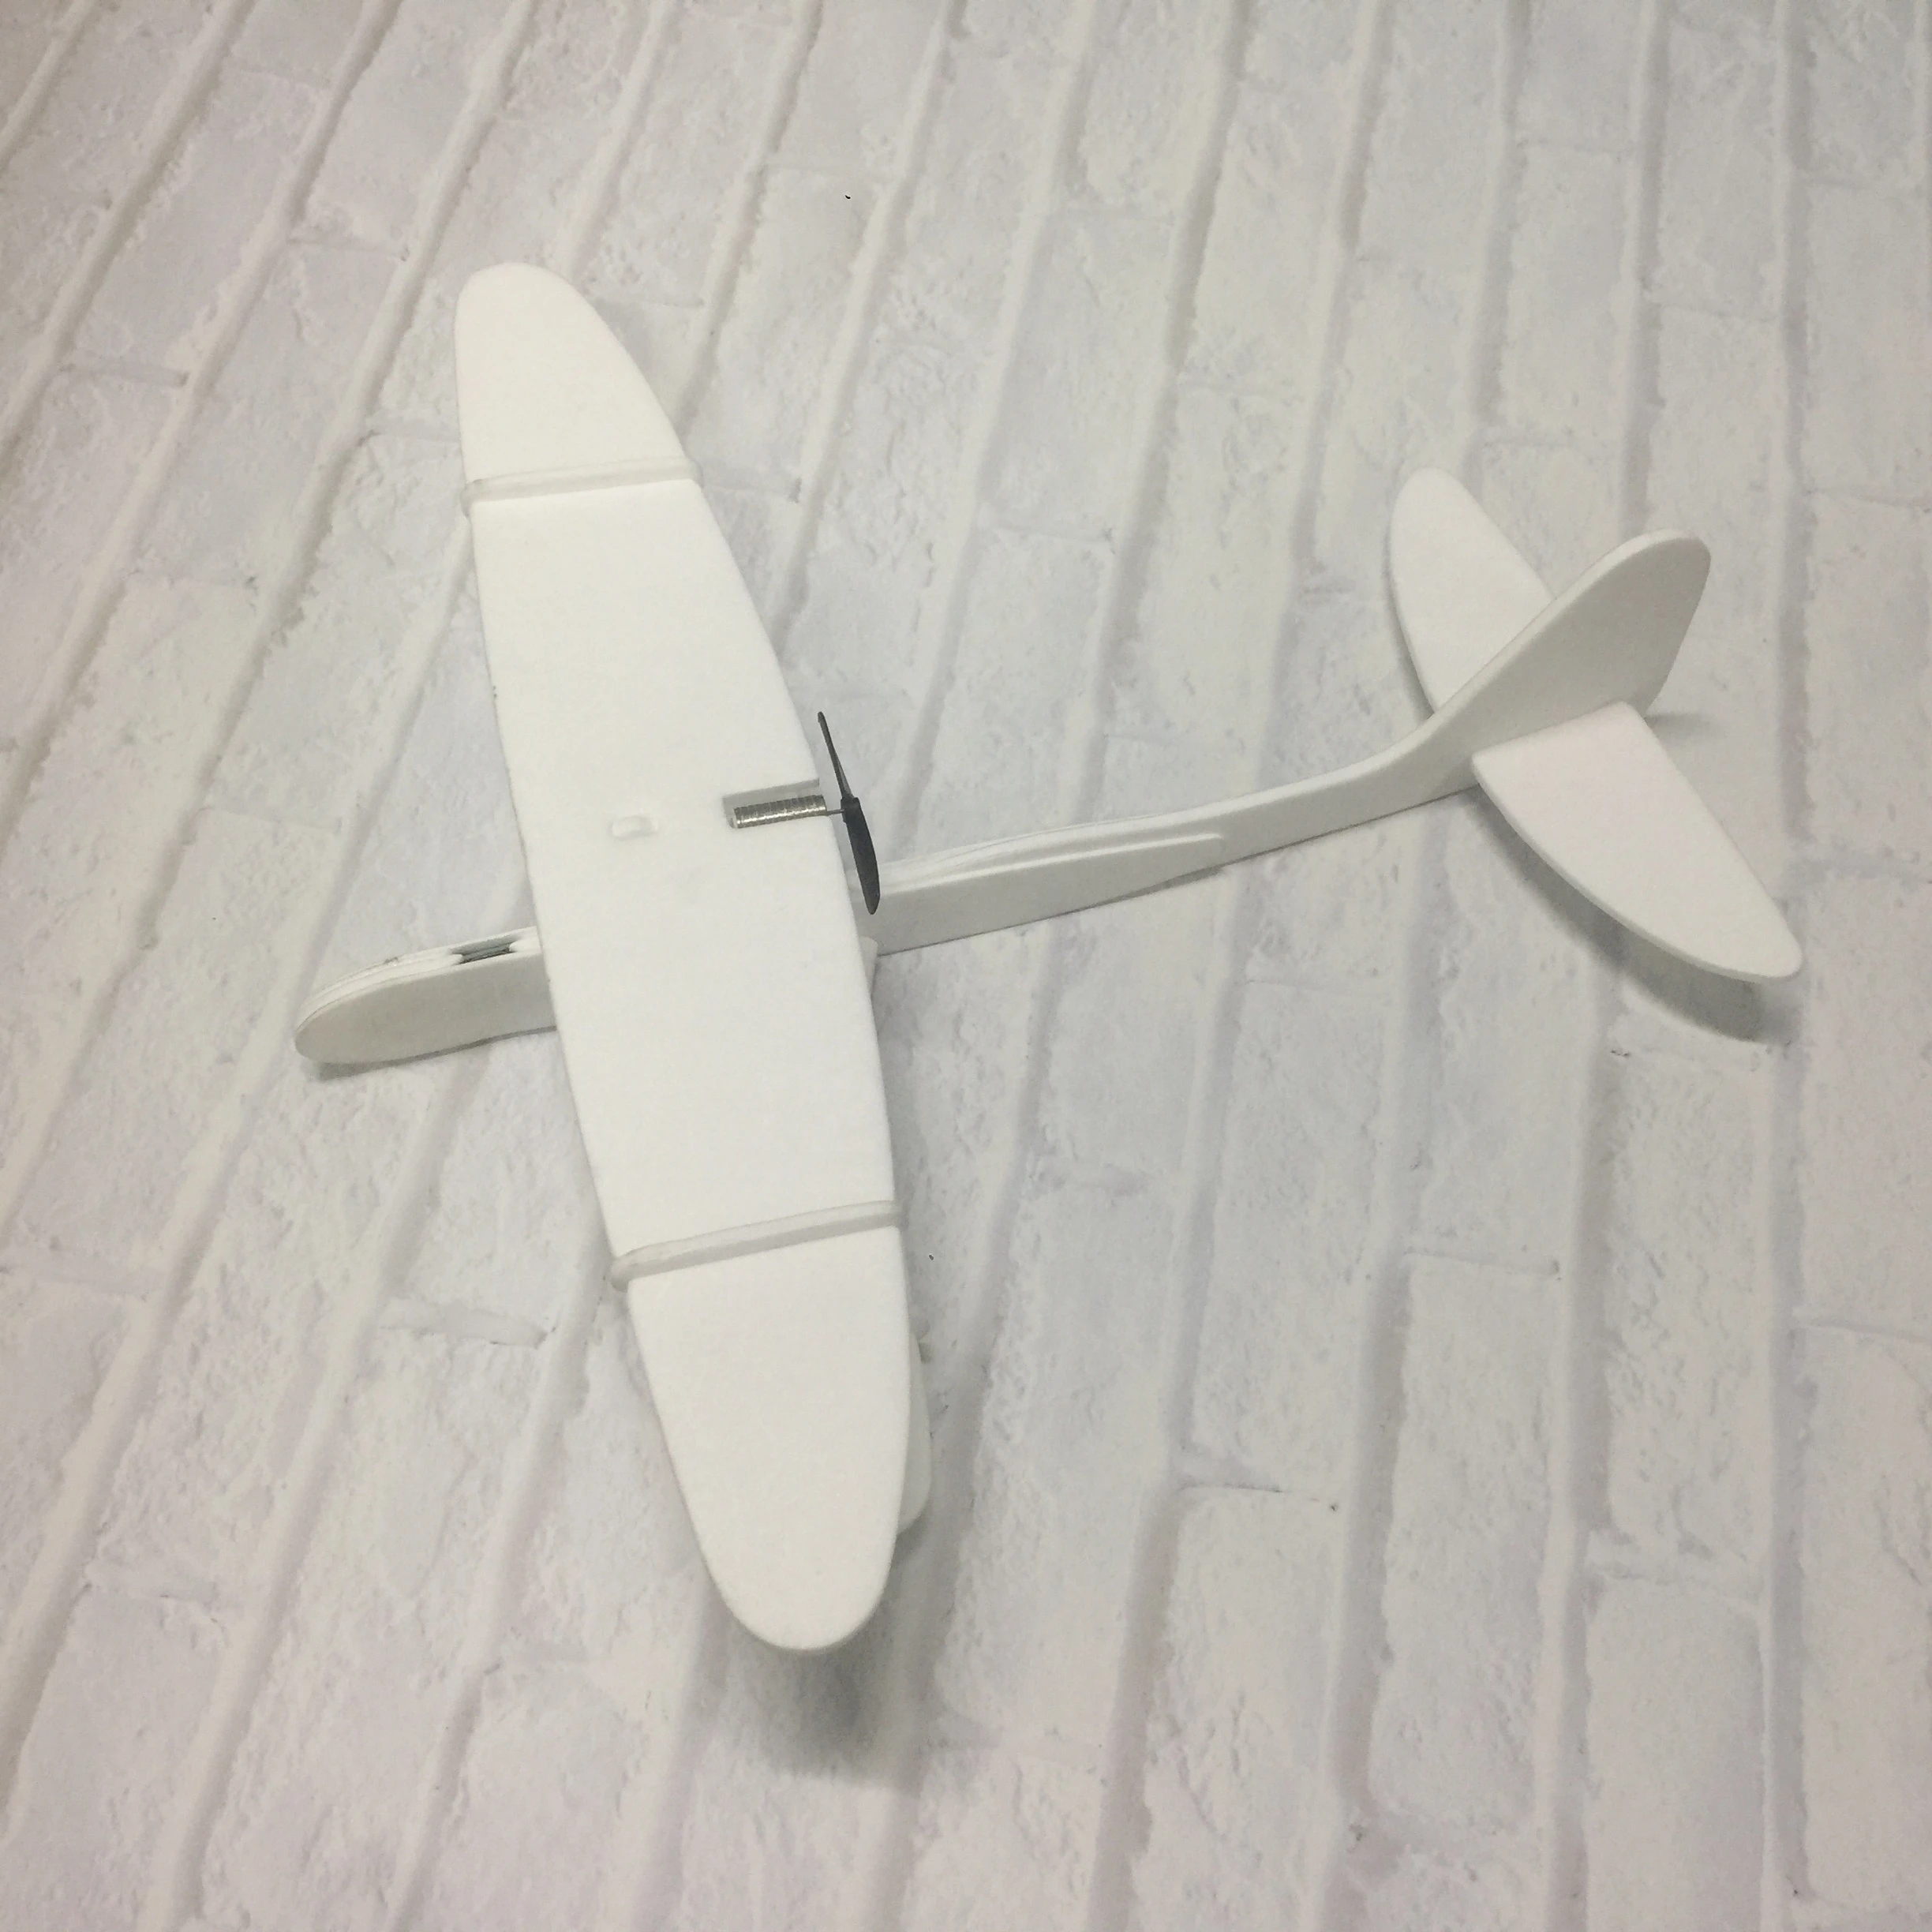 EPP ELECTRIC AIRCRAFTS  WITH DOUBLE WINGS